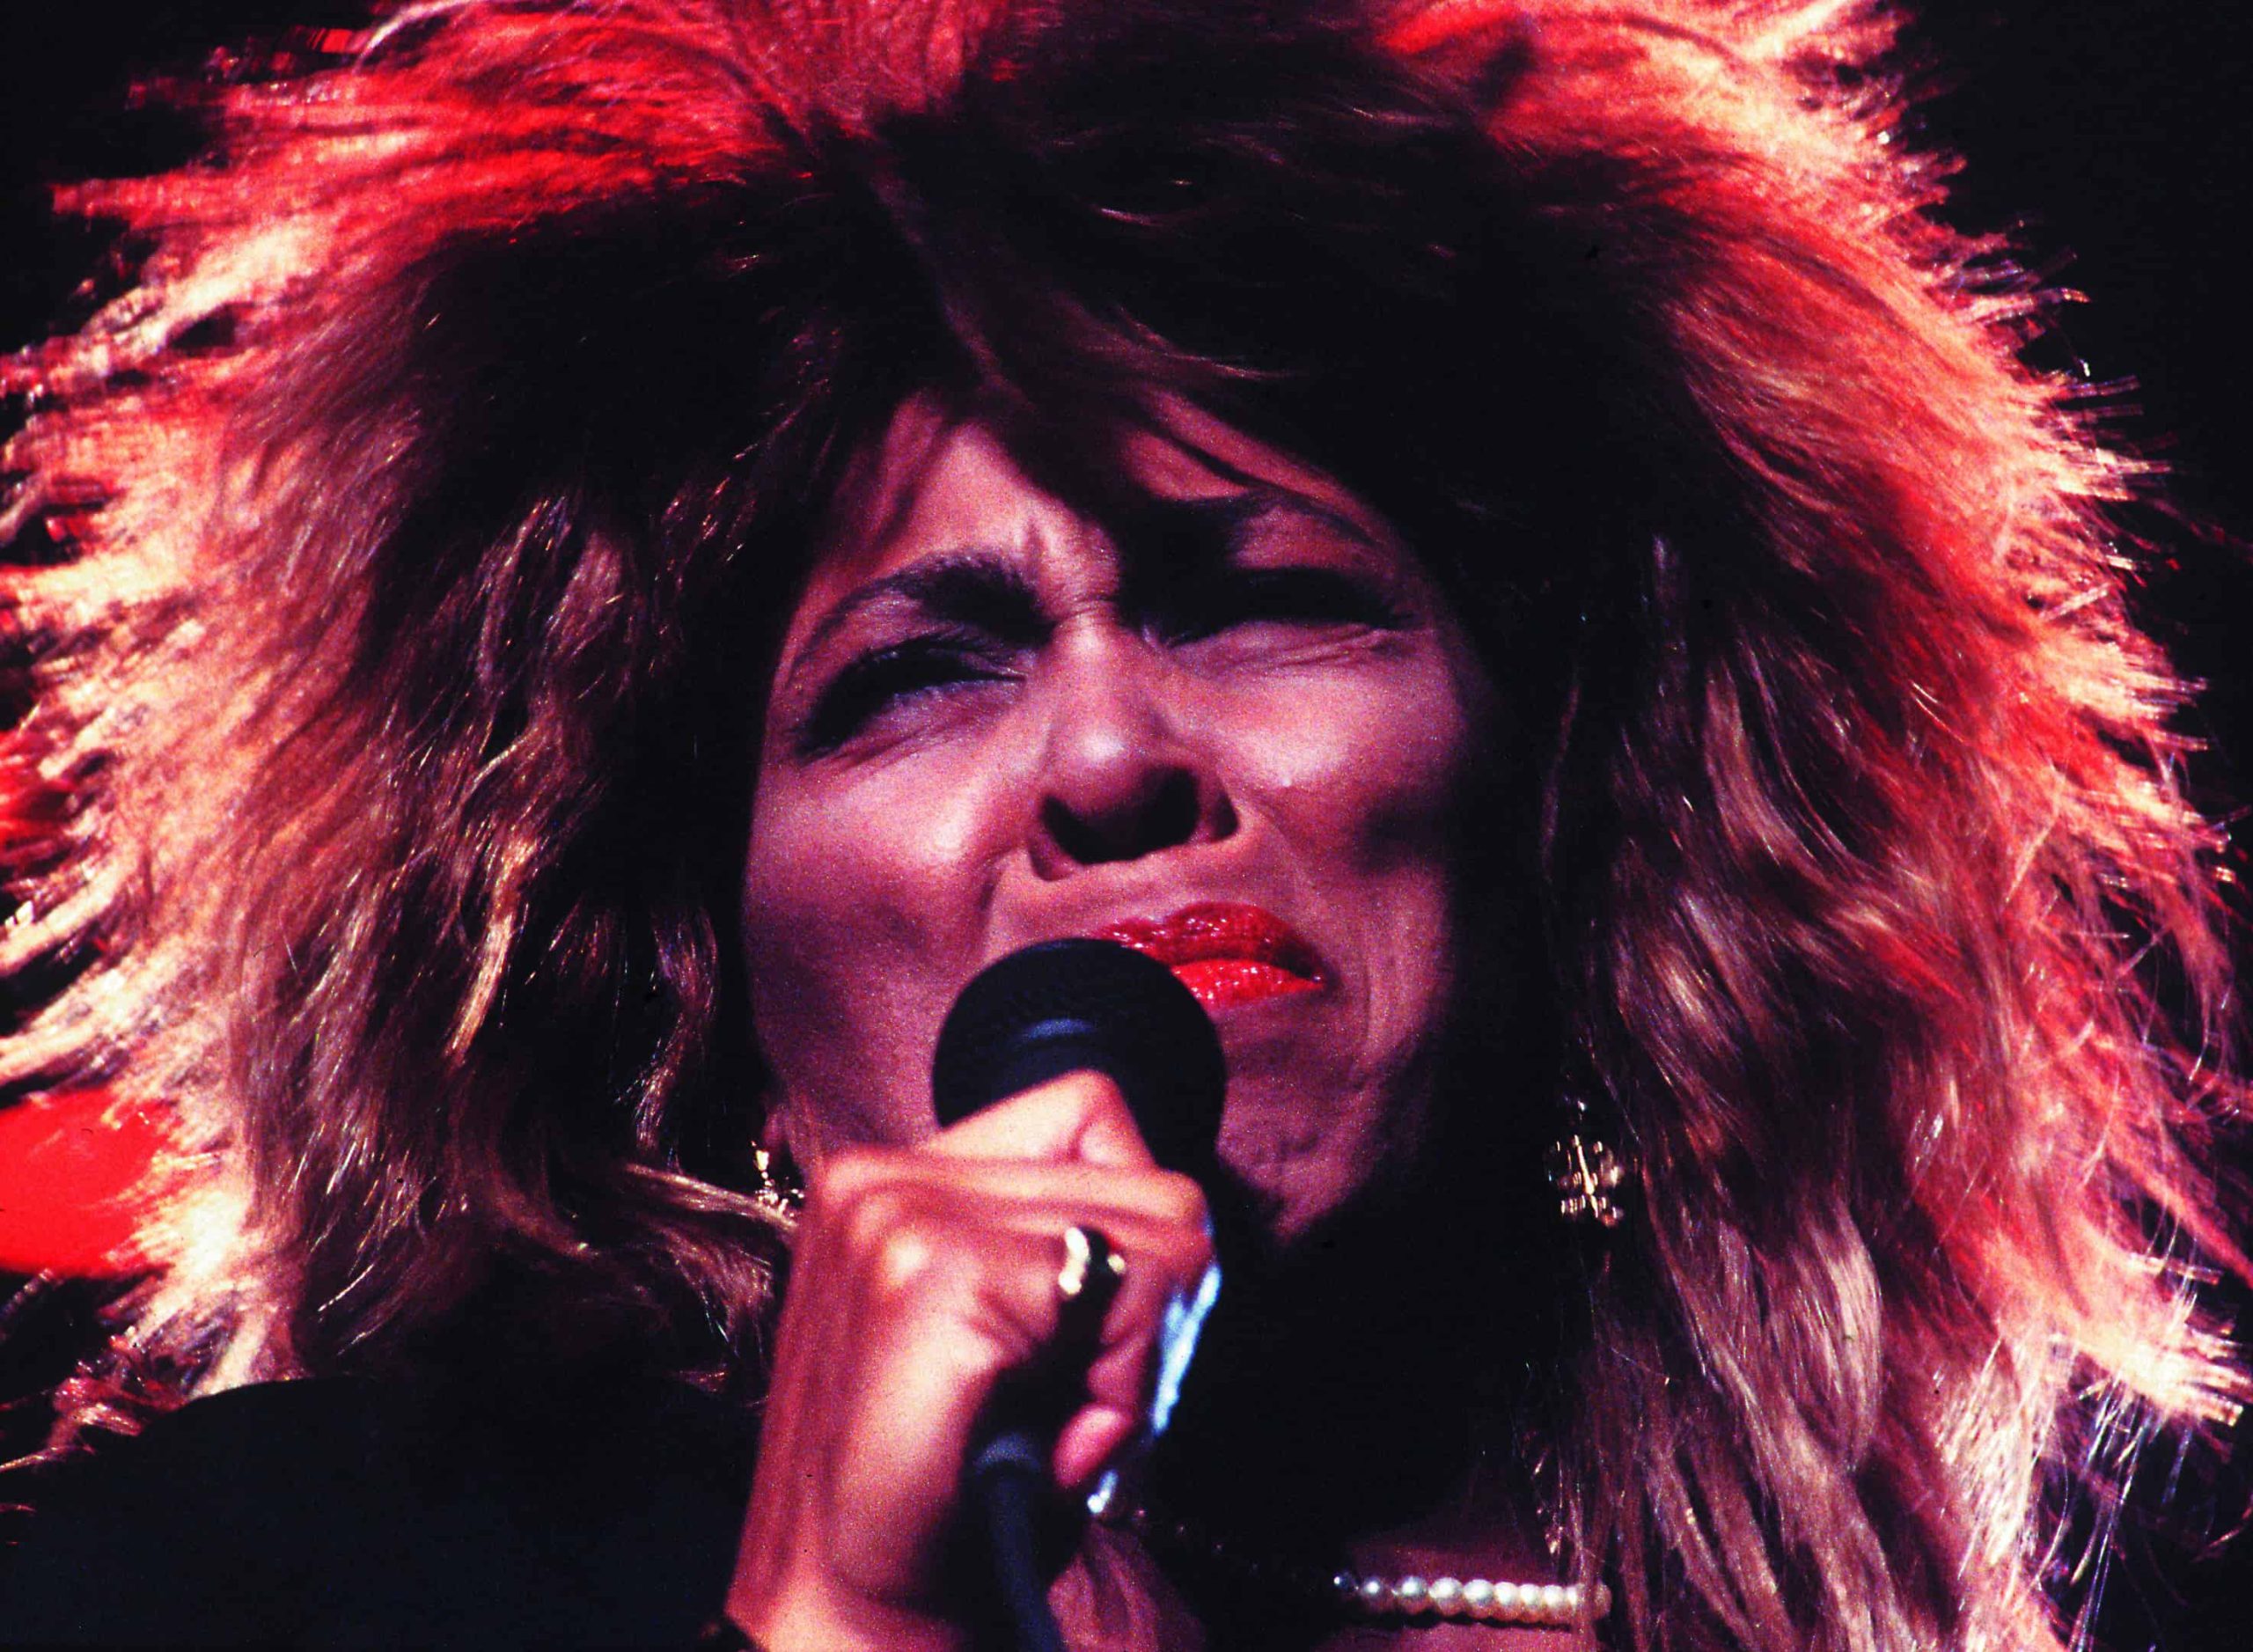 Tina Turner receives tributes from some of the biggest names in music